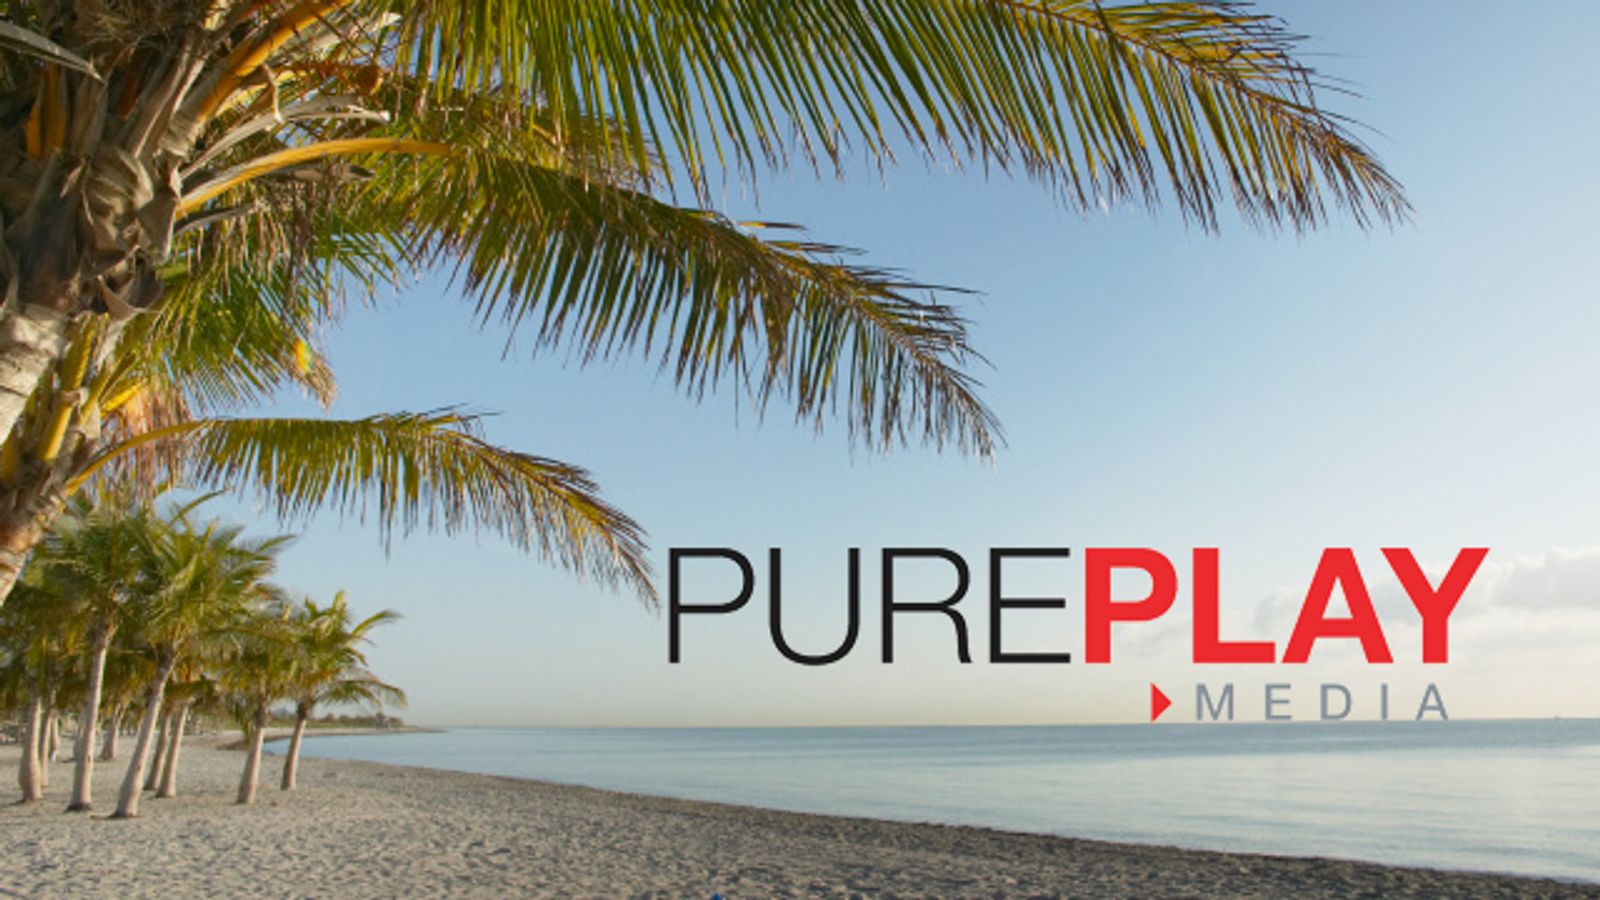 Pure Play Media Offers Special Package Deals in August